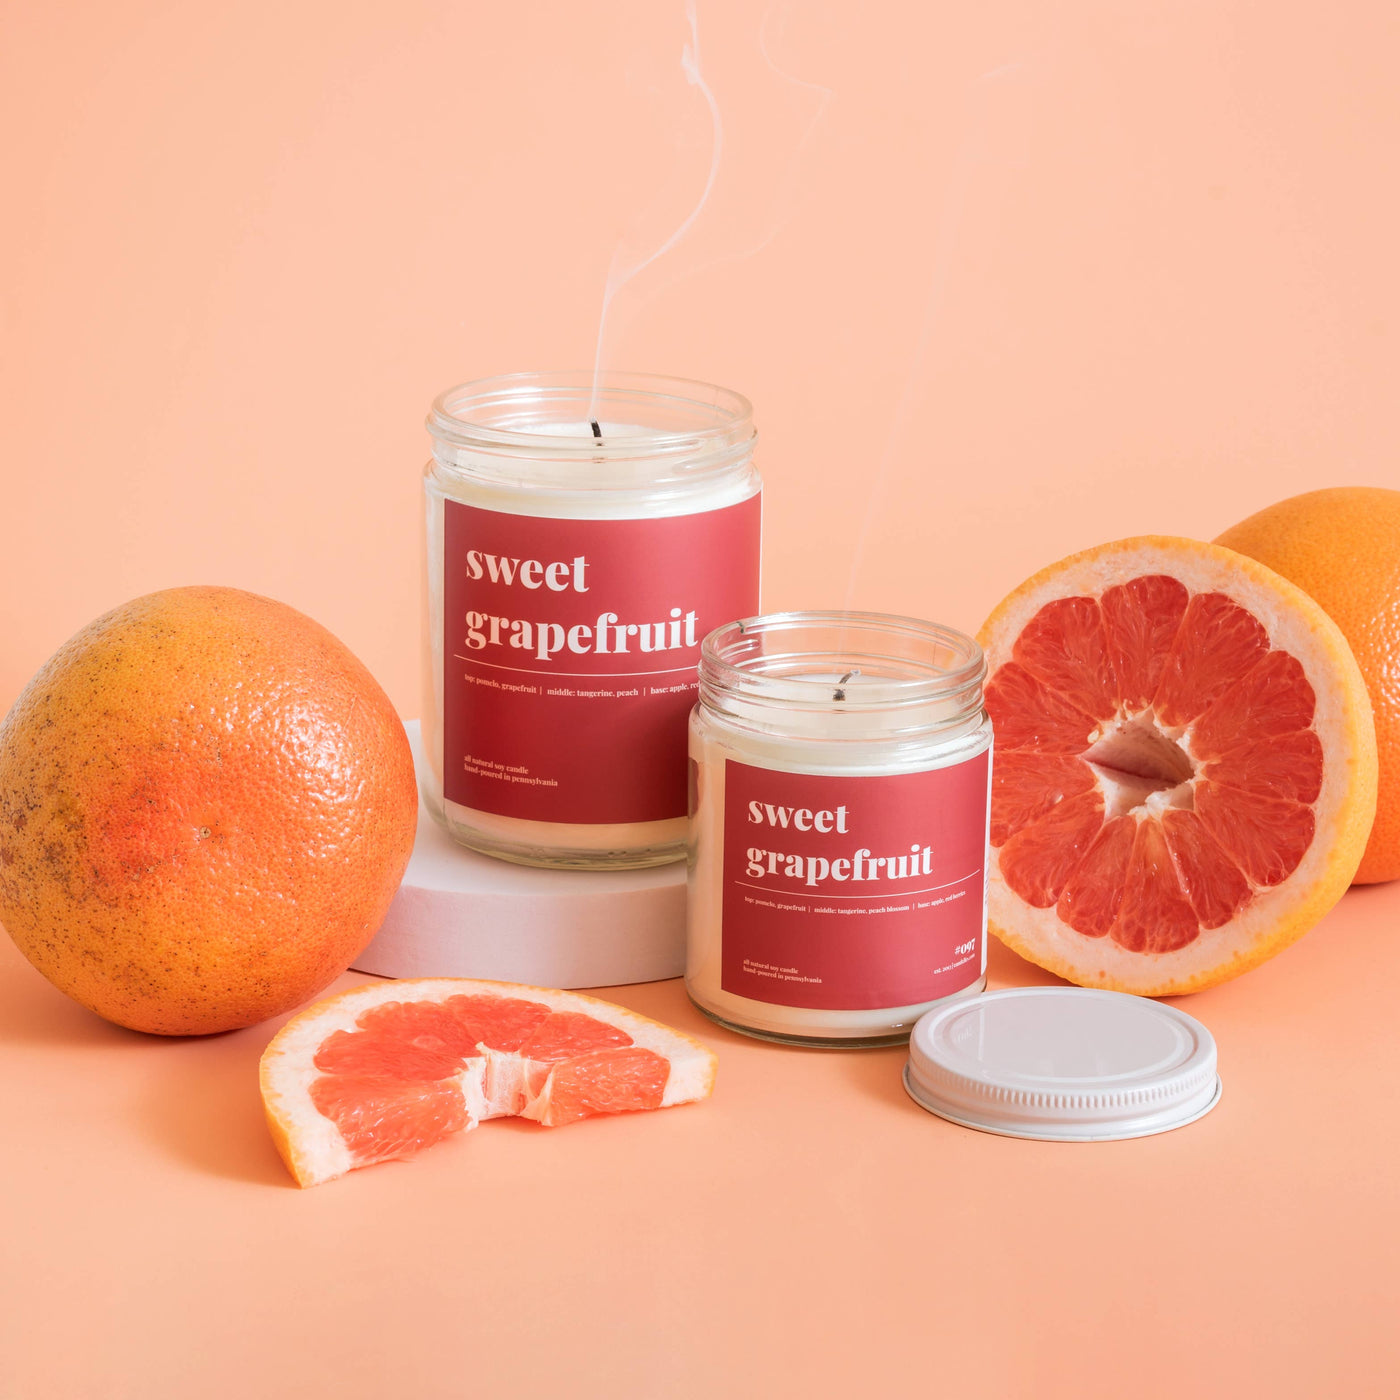 Sweet Grapefruit Scented Soy Candle - 9oz: 9 oz